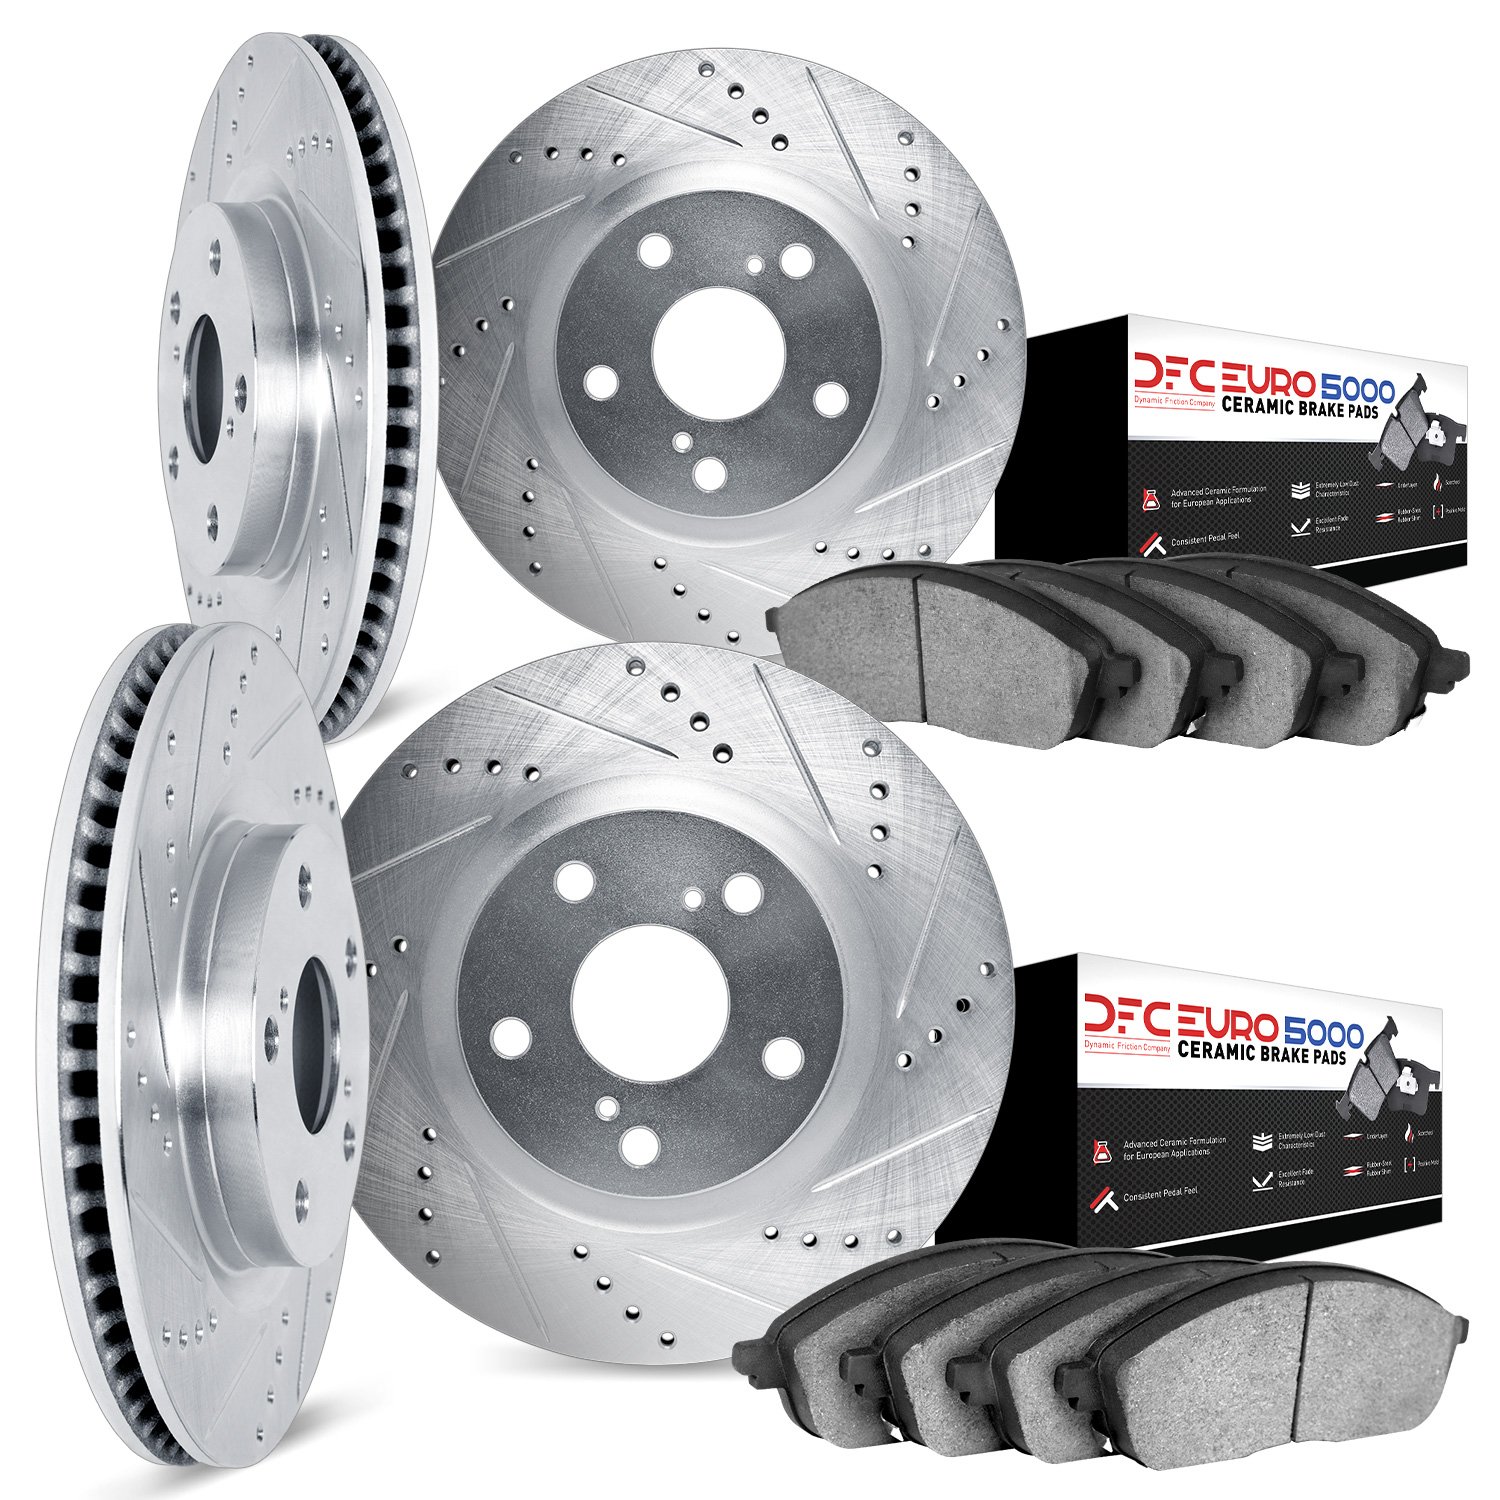 7604-31027 Drilled/Slotted Brake Rotors w/5000 Euro Ceramic Brake Pads Kit [Silver], 2011-2016 BMW, Position: Front and Rear